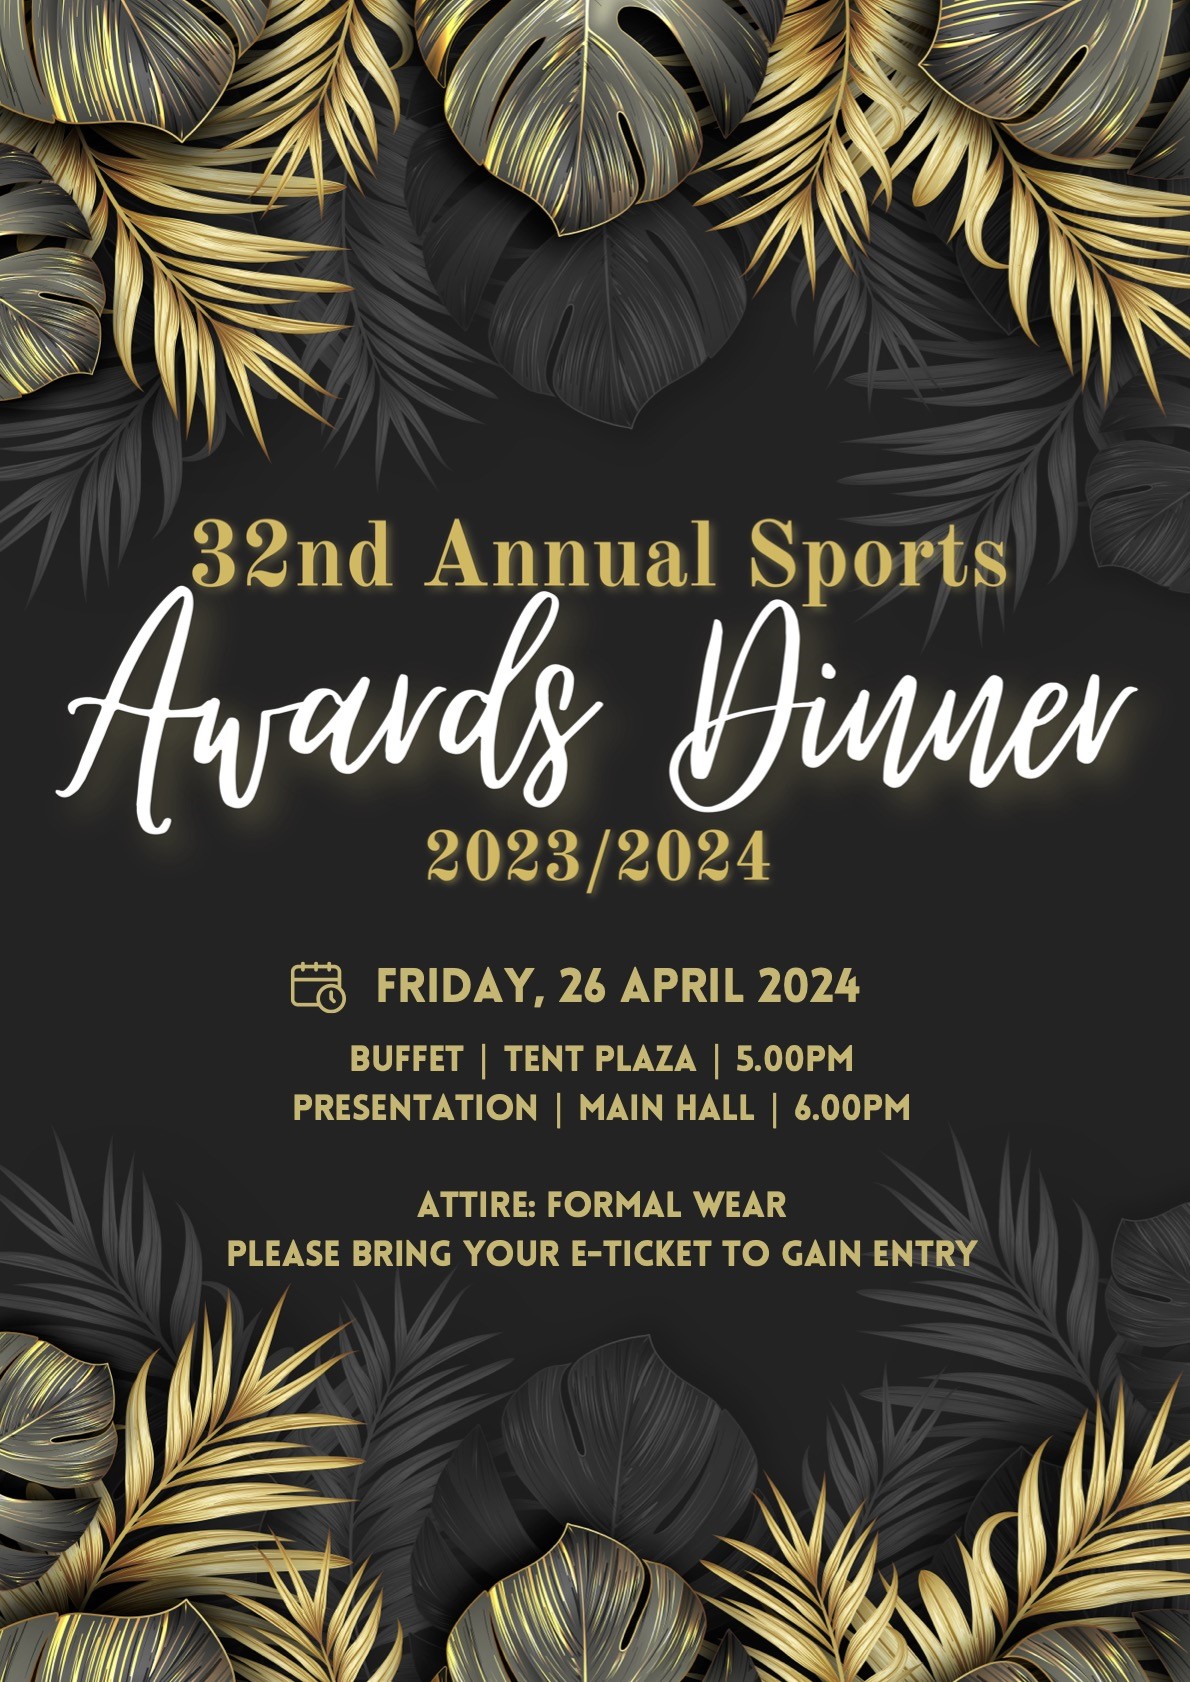 Dover 32nd Annual Sports Awards Dinner  on Apr 26, 17:00@Main Hall - Dover Campus - Buy tickets and Get information on UWCSEA Ticket Hub uwcsea